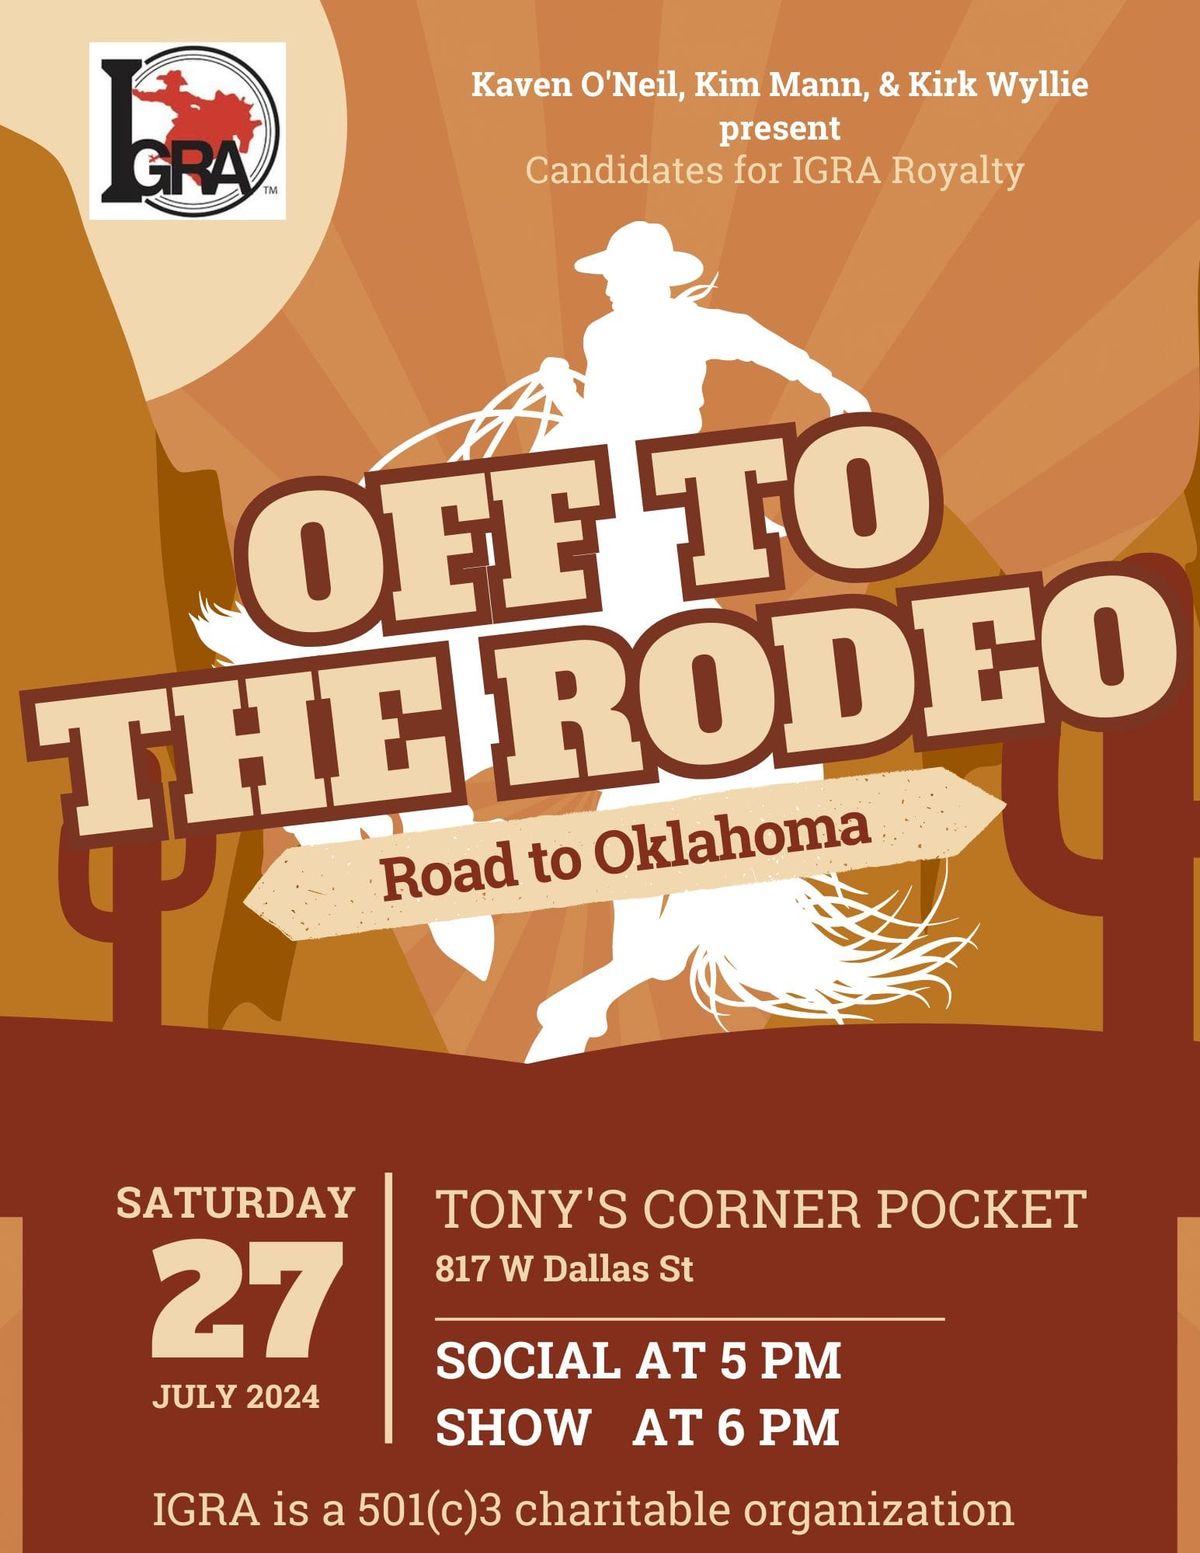 Off to the Rodeo: Road to Oklahoma